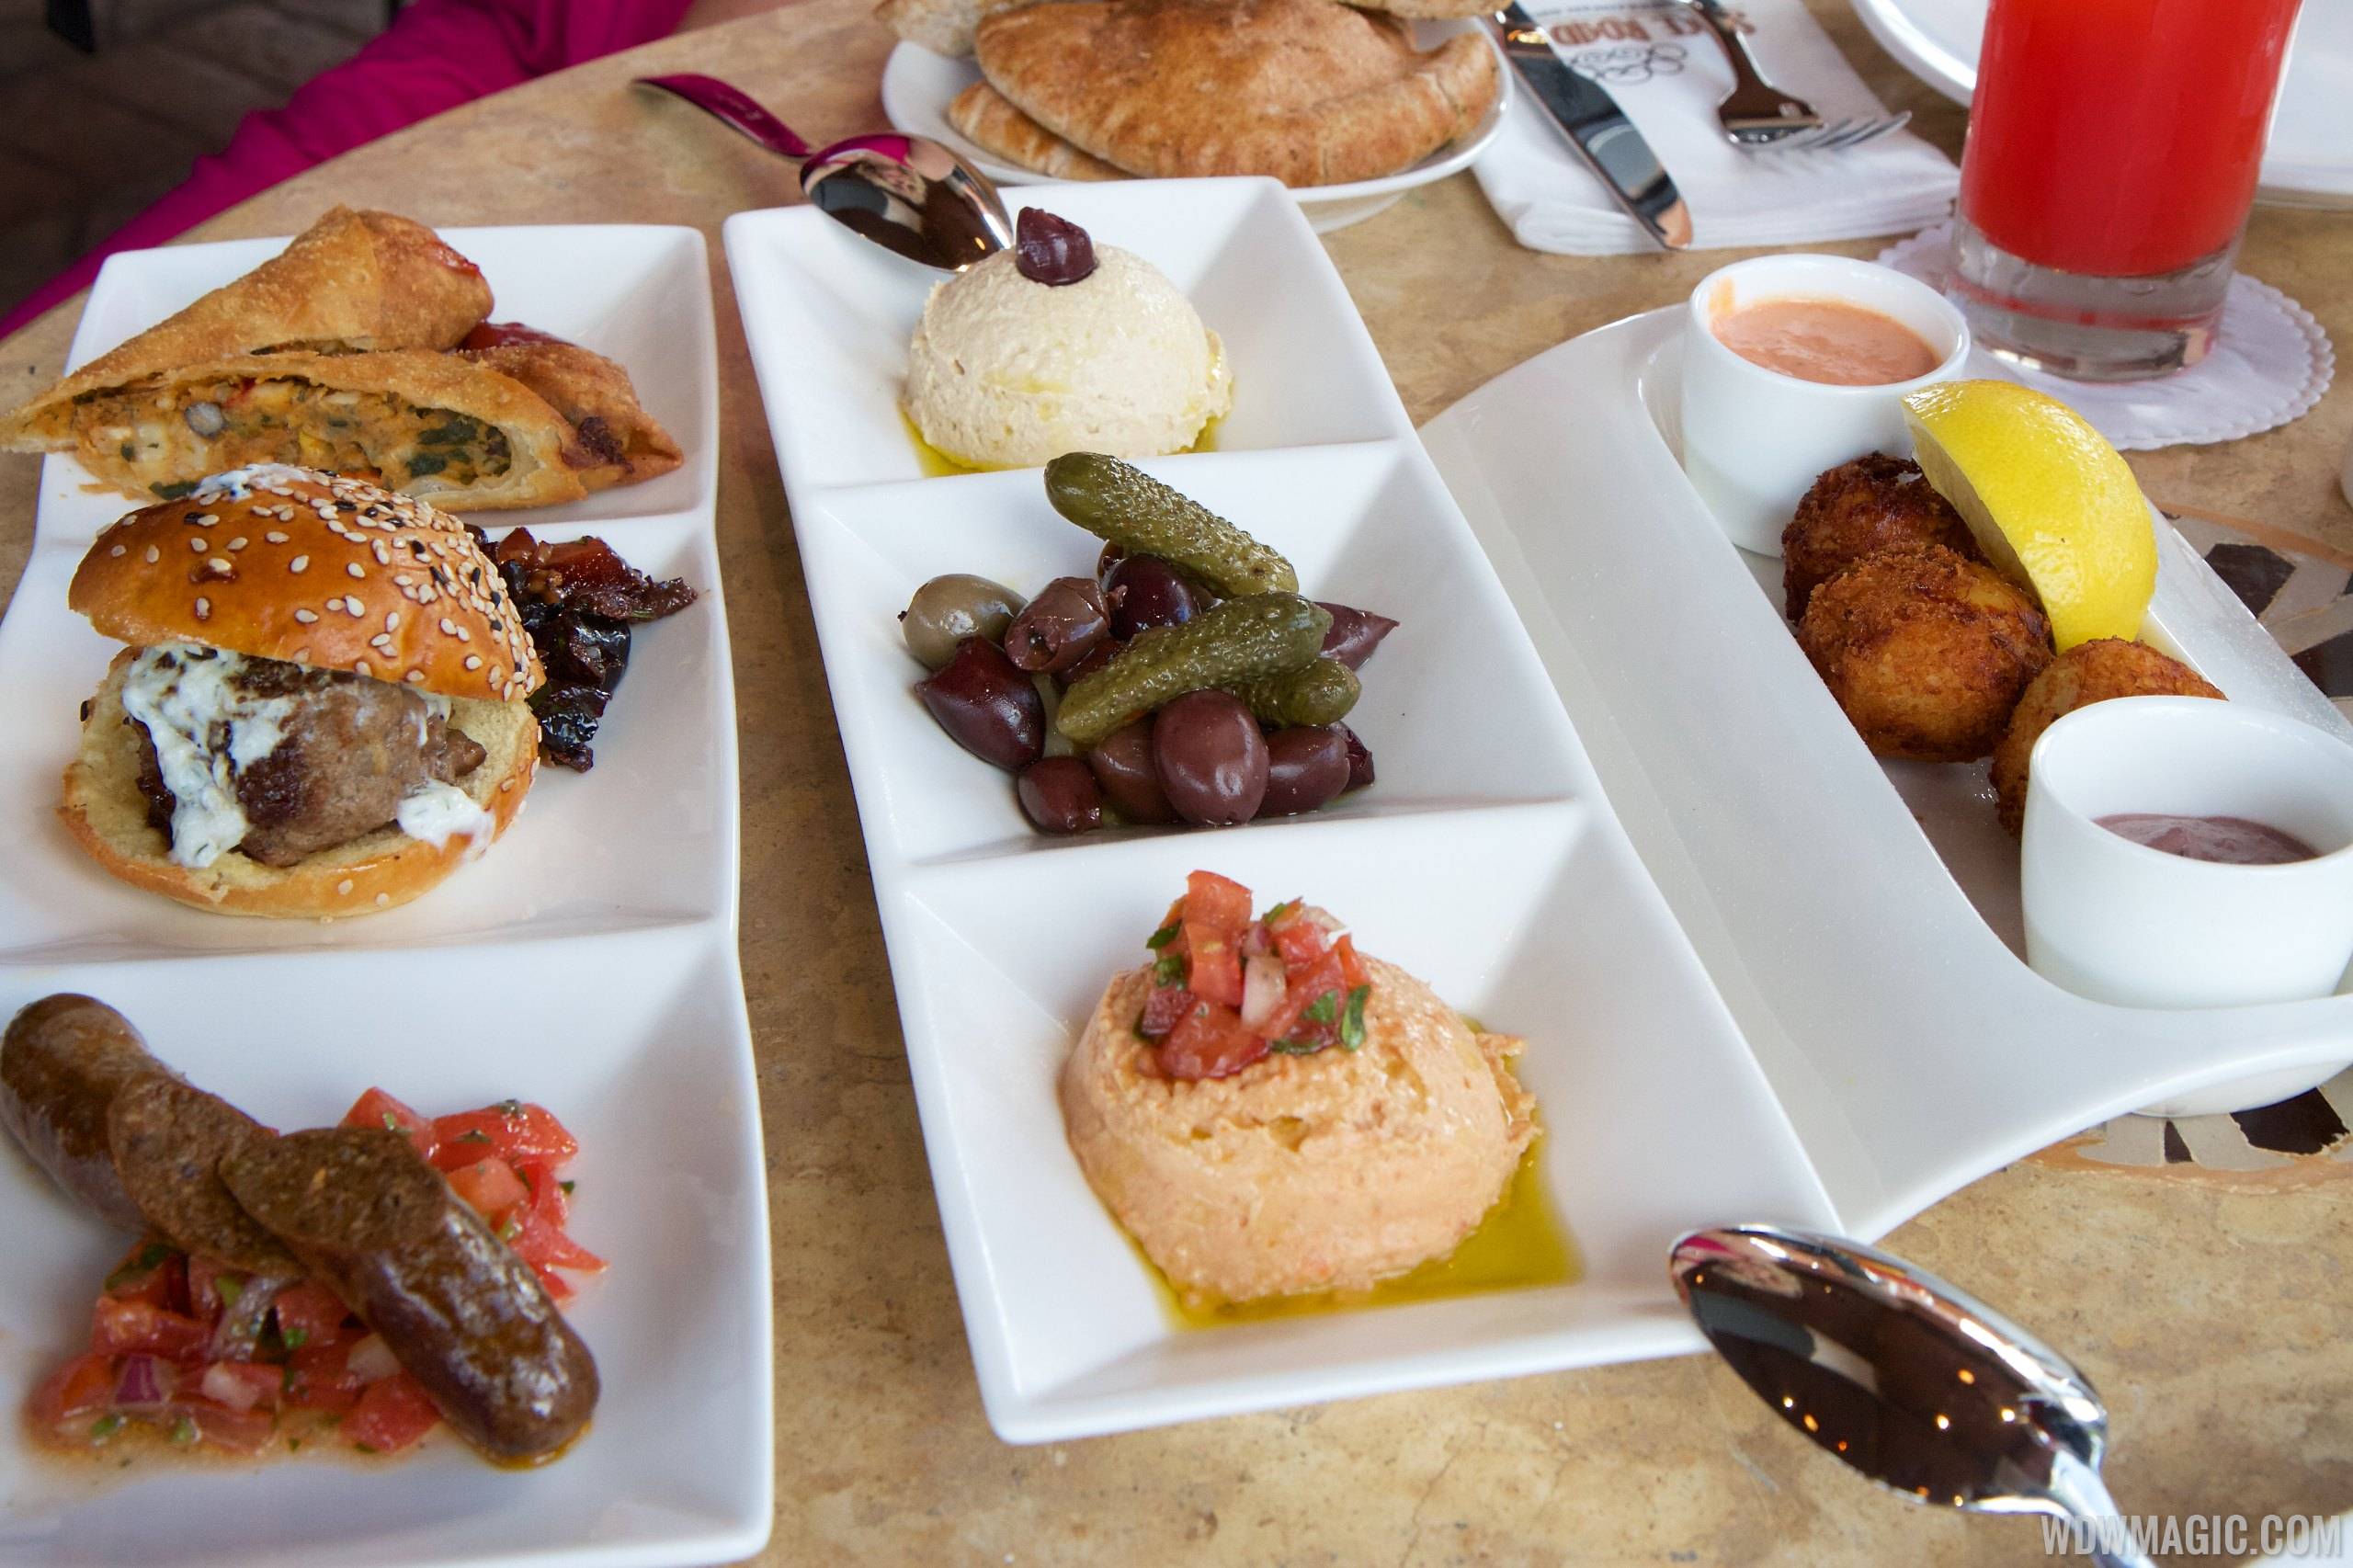 Spice Road Table - Tingis Sampler $16, Hummus and Imported Olives $10, Salted Cod Croquettes $10